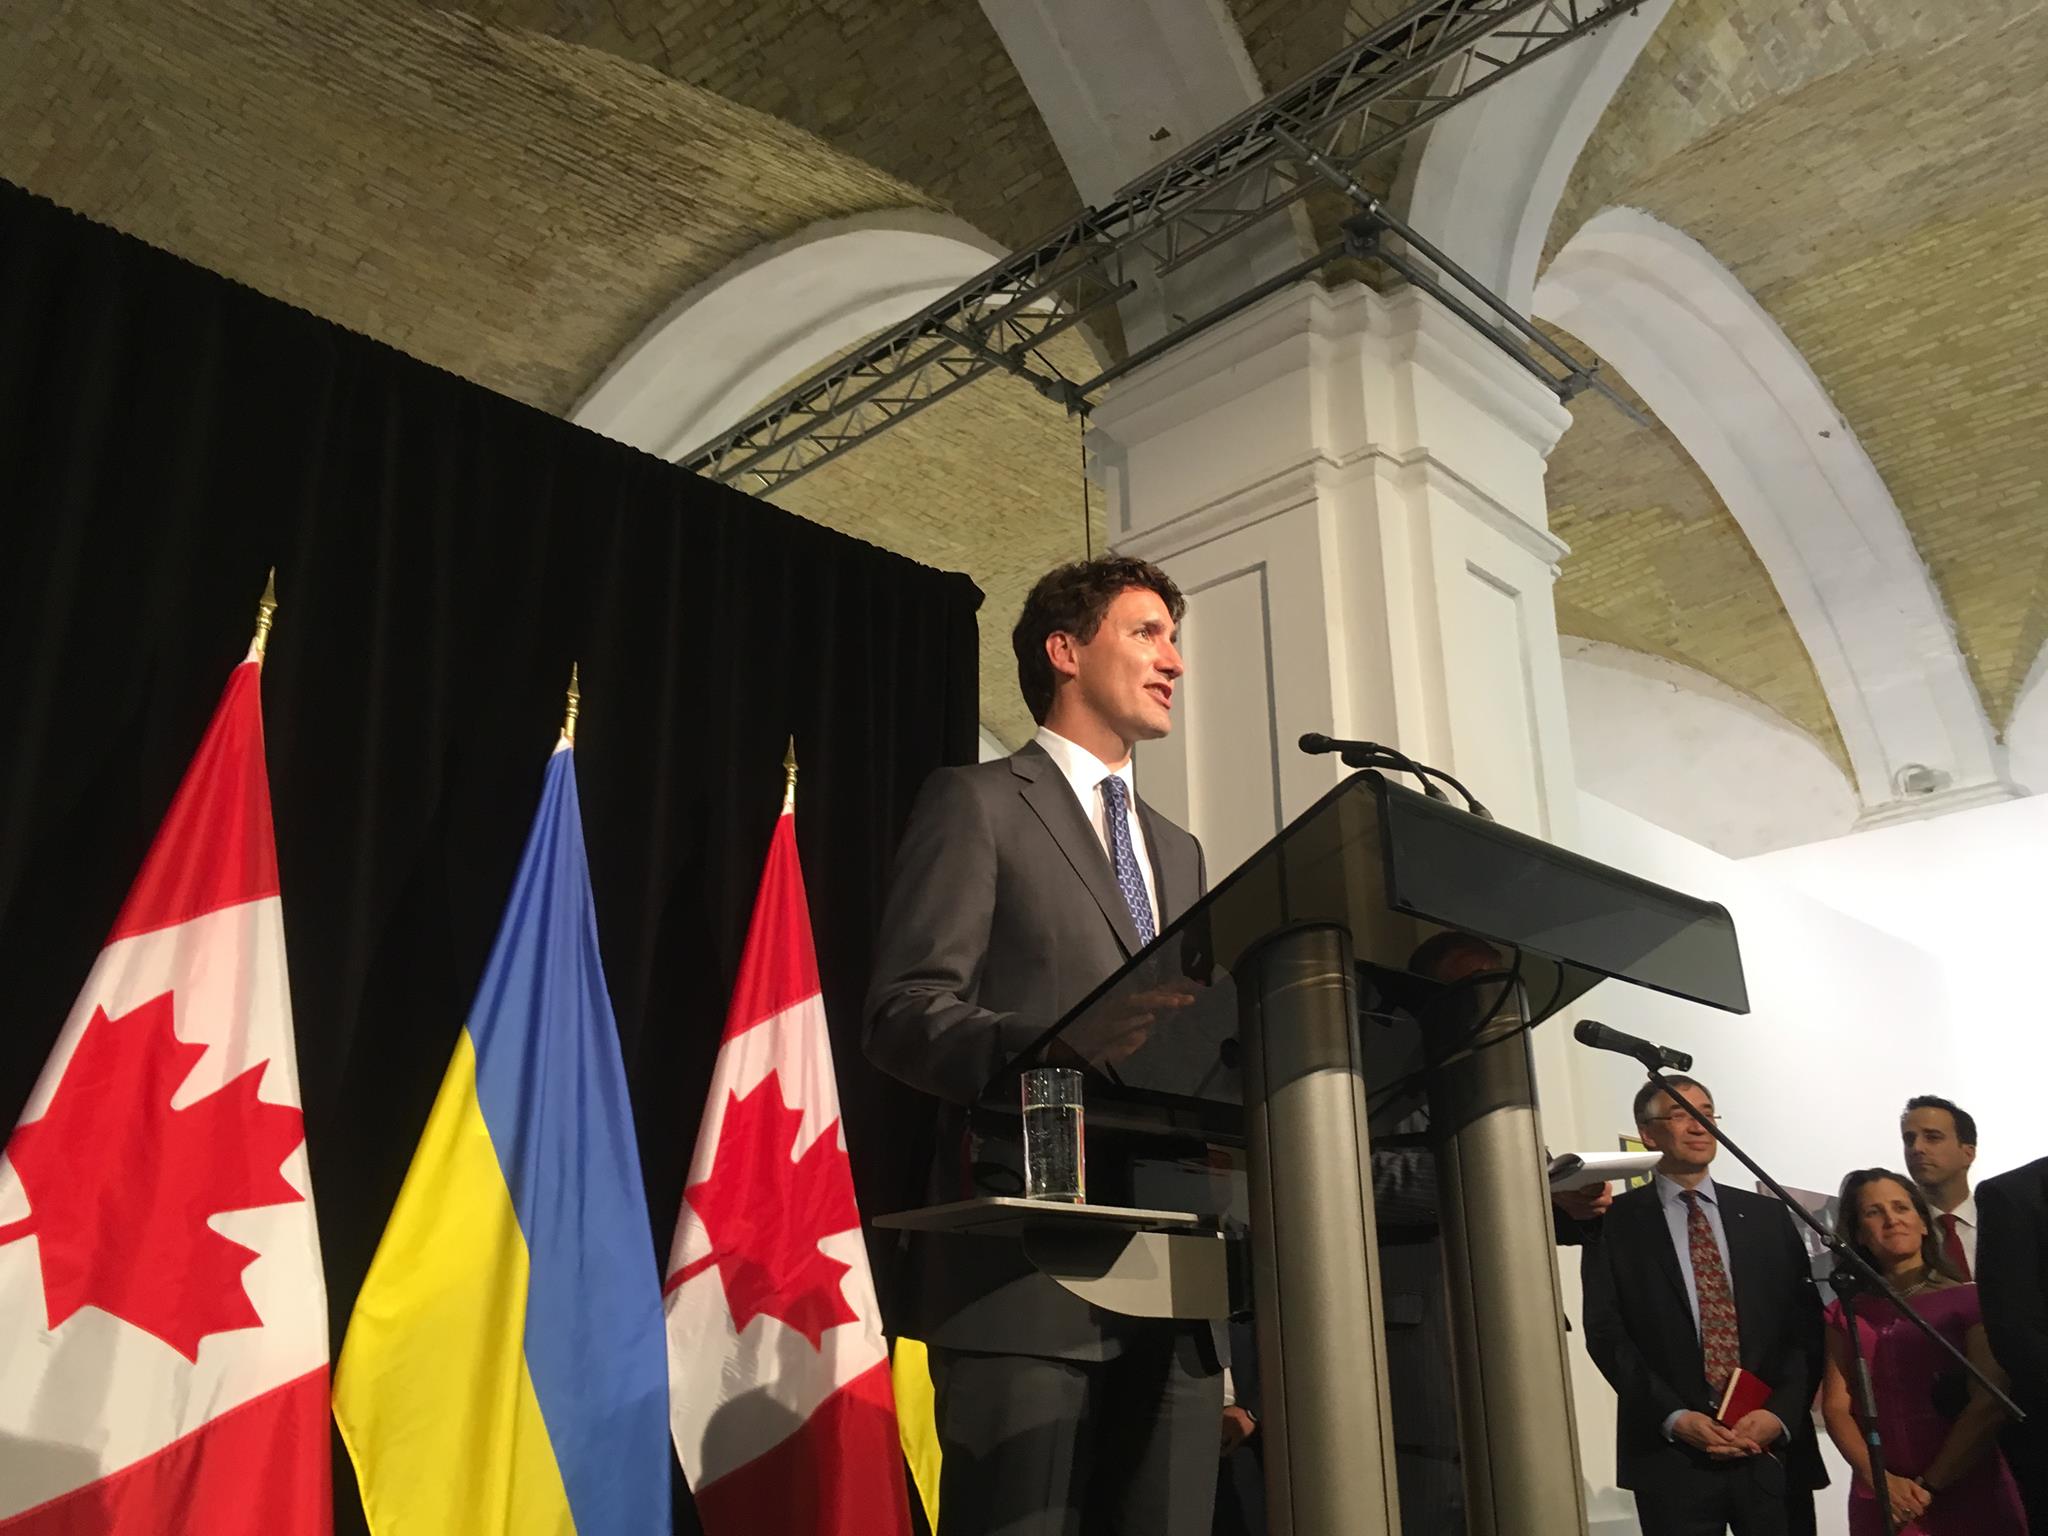 Canada and Ukraine: Shared Values and Real Economic Opportunities